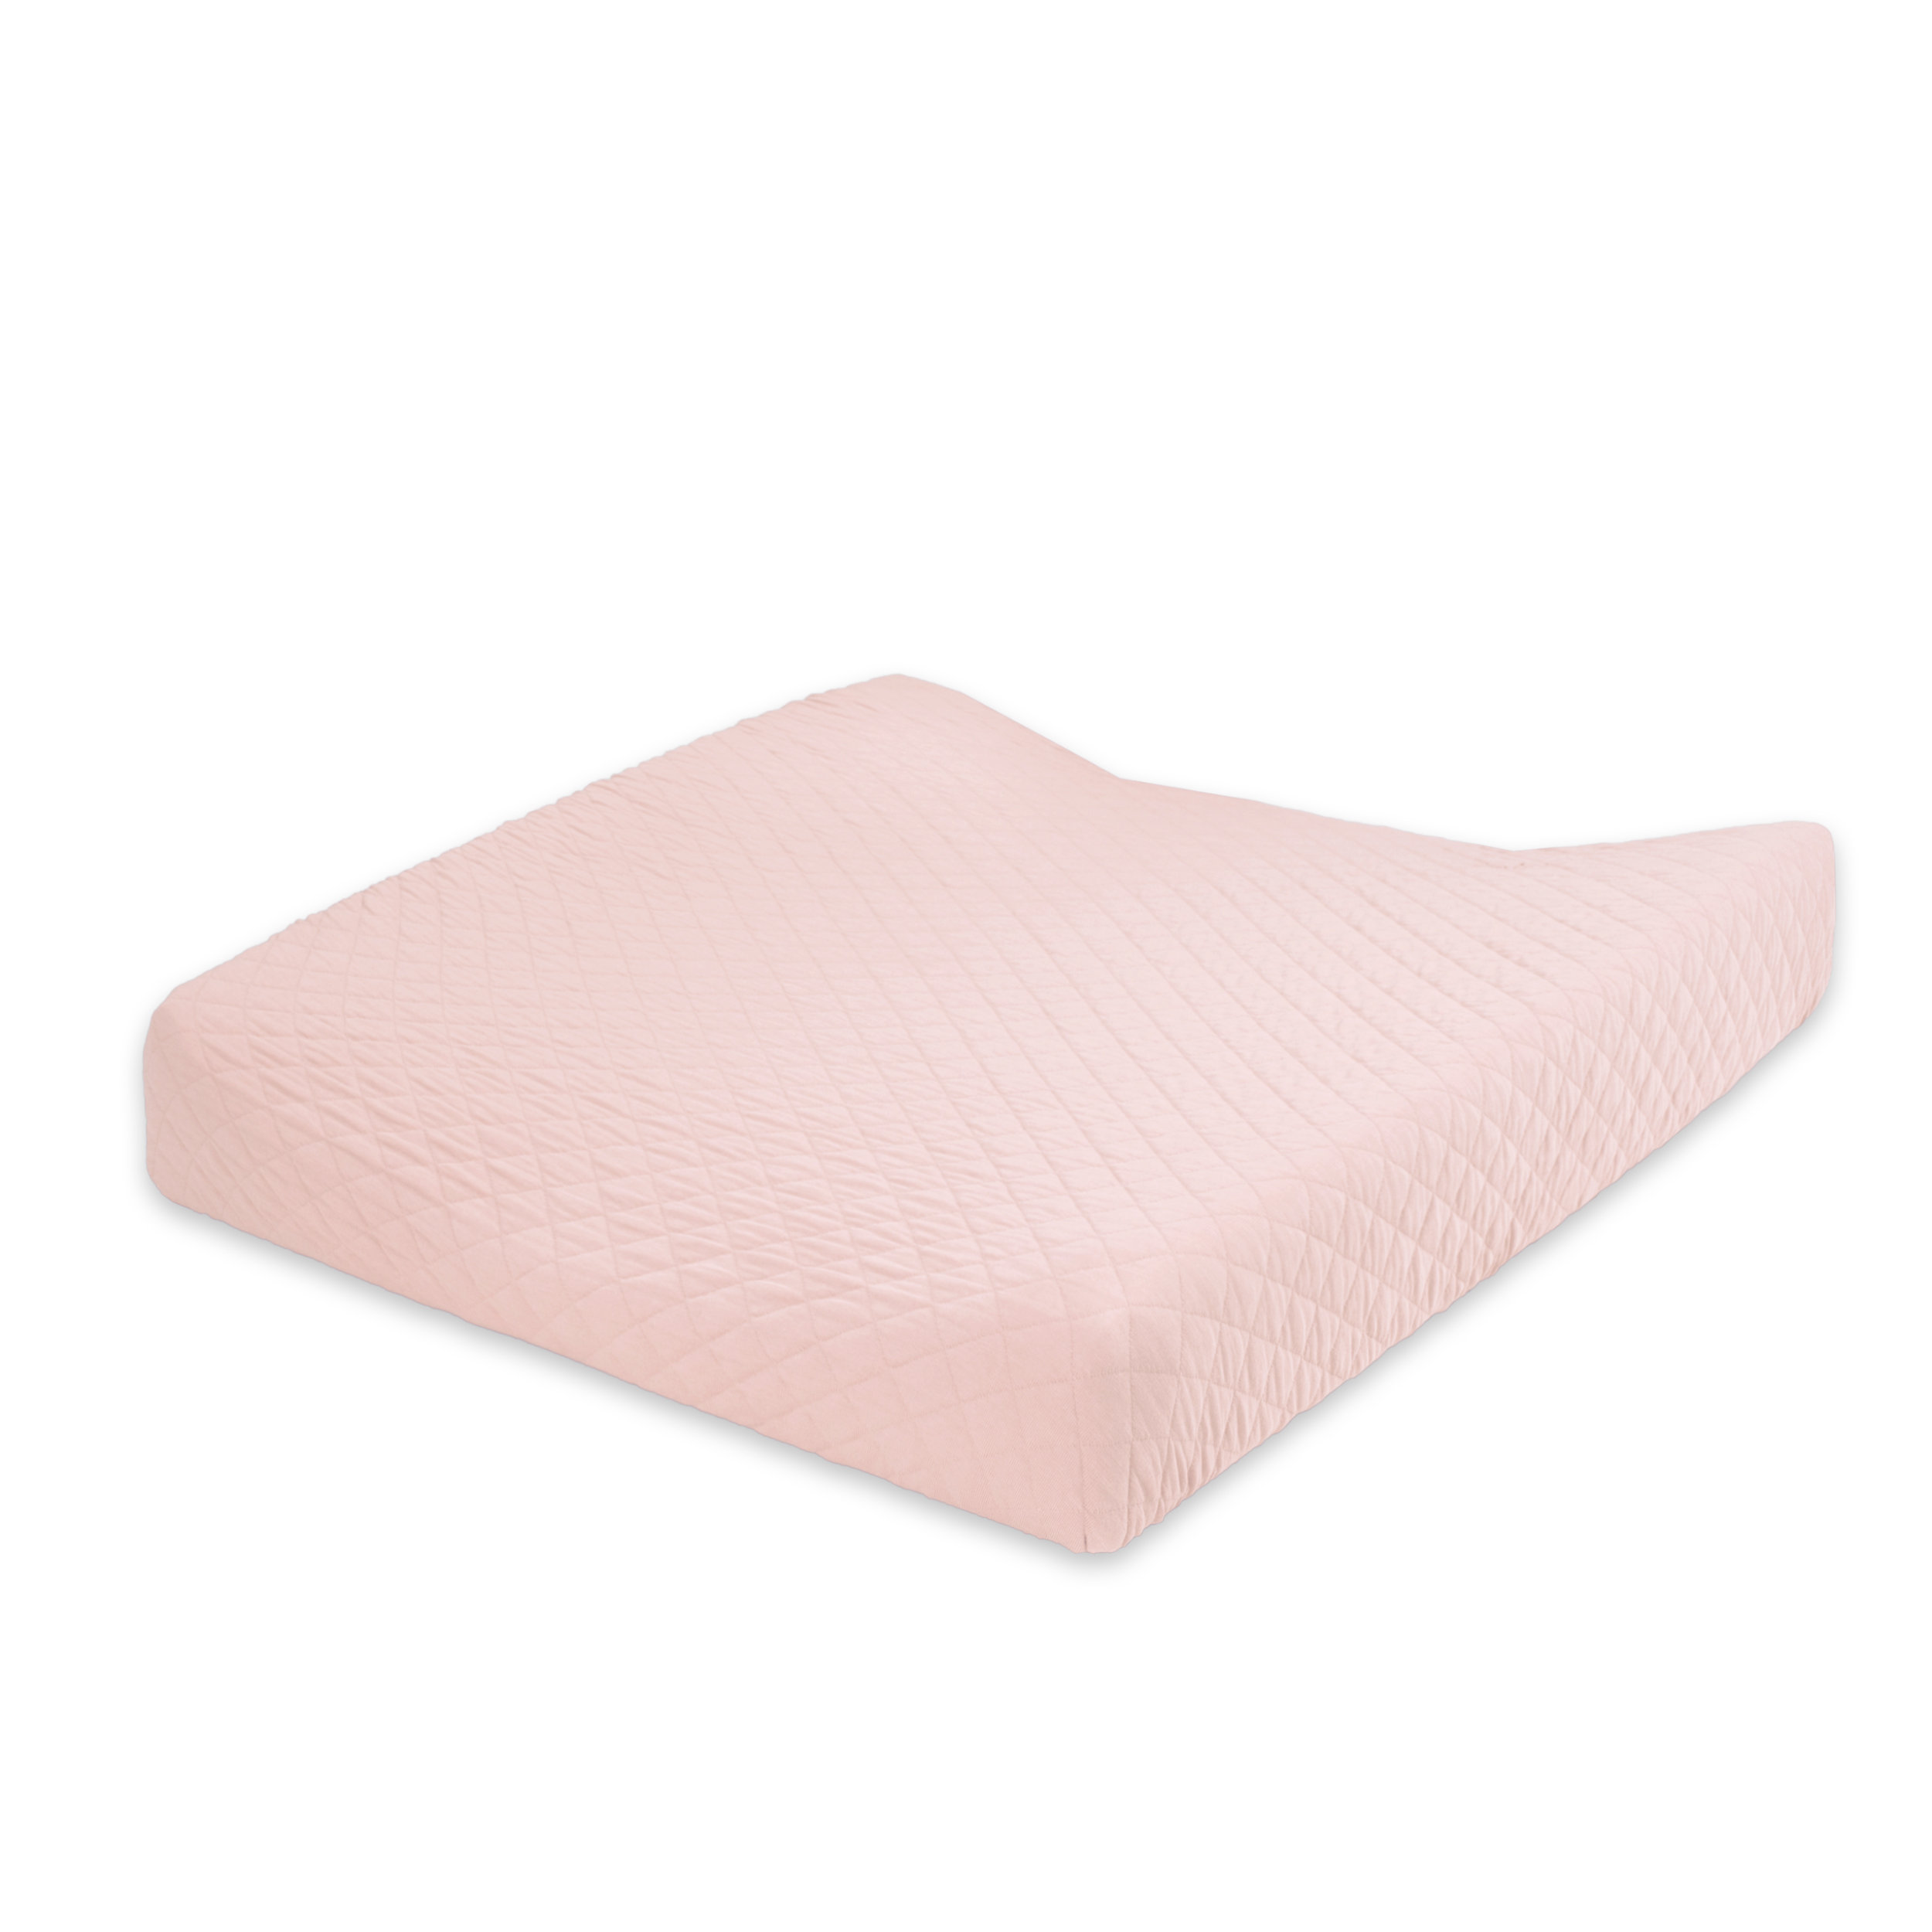 Waskussenhoes Pady quilted jersey 50x75cm QUILT Blush